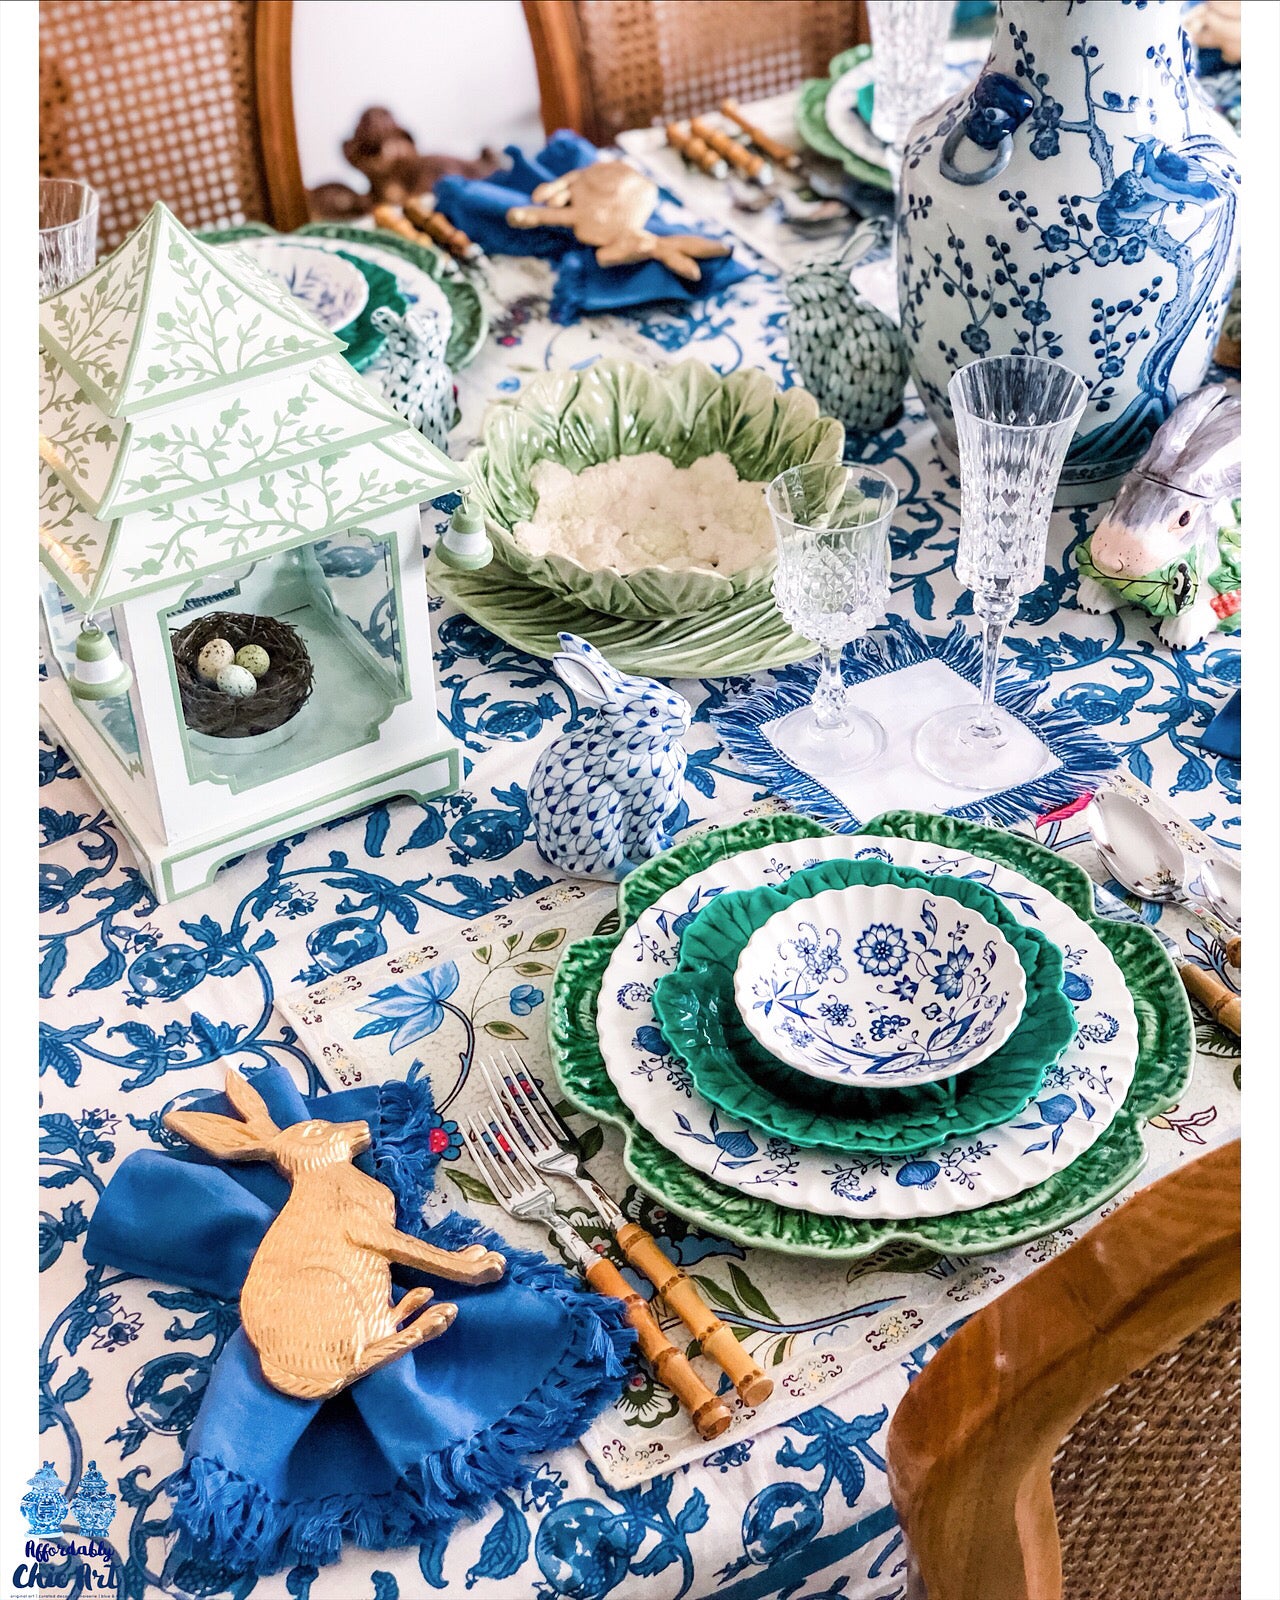 Terrific Tablescapes – Affordably Chic Art